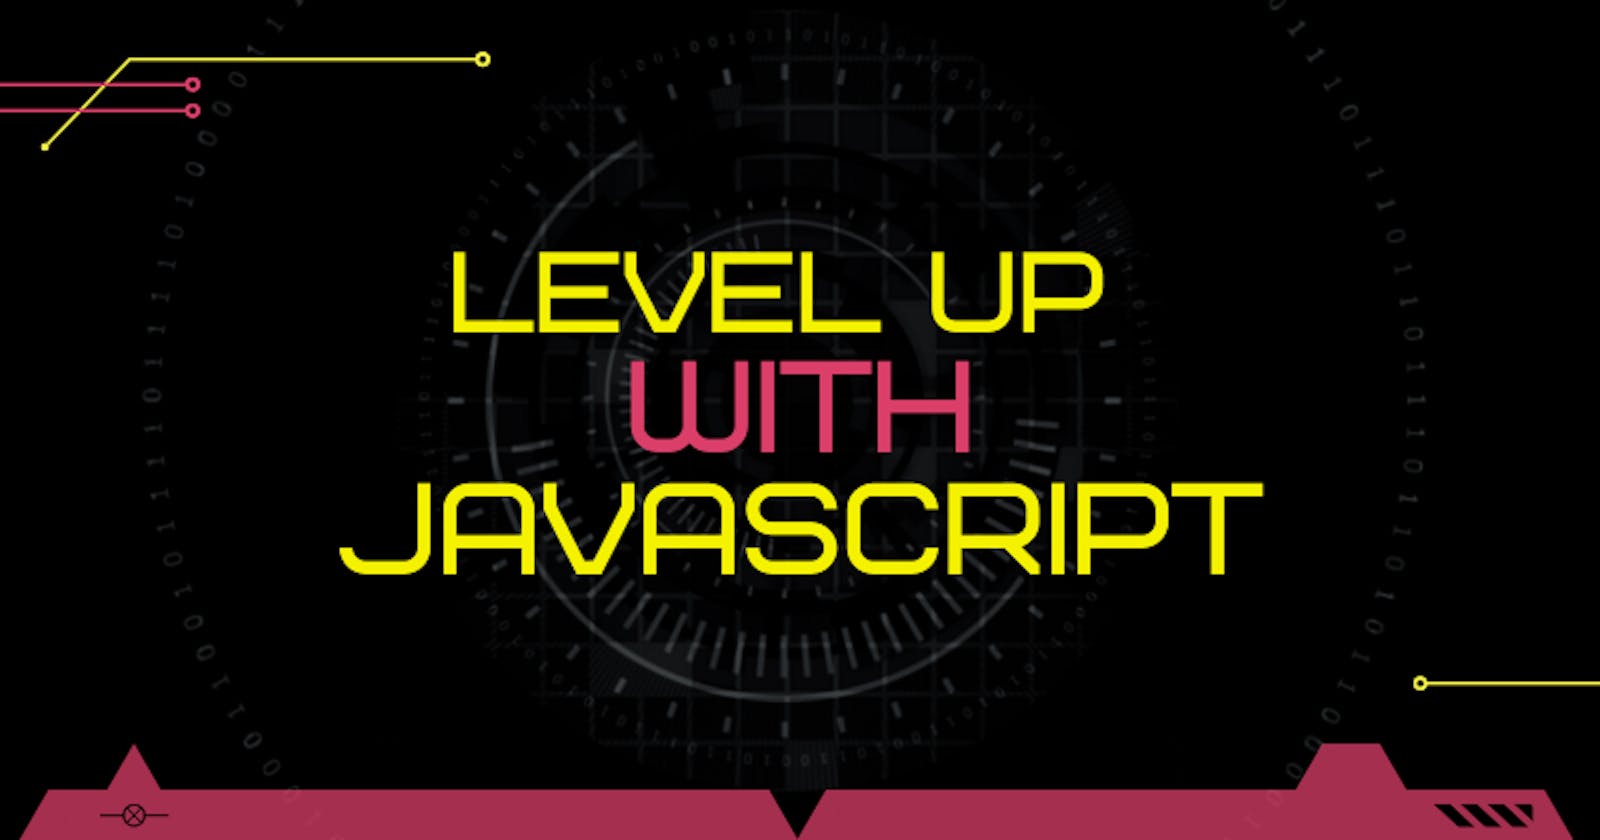 Level Up with JavaScript - Level 2